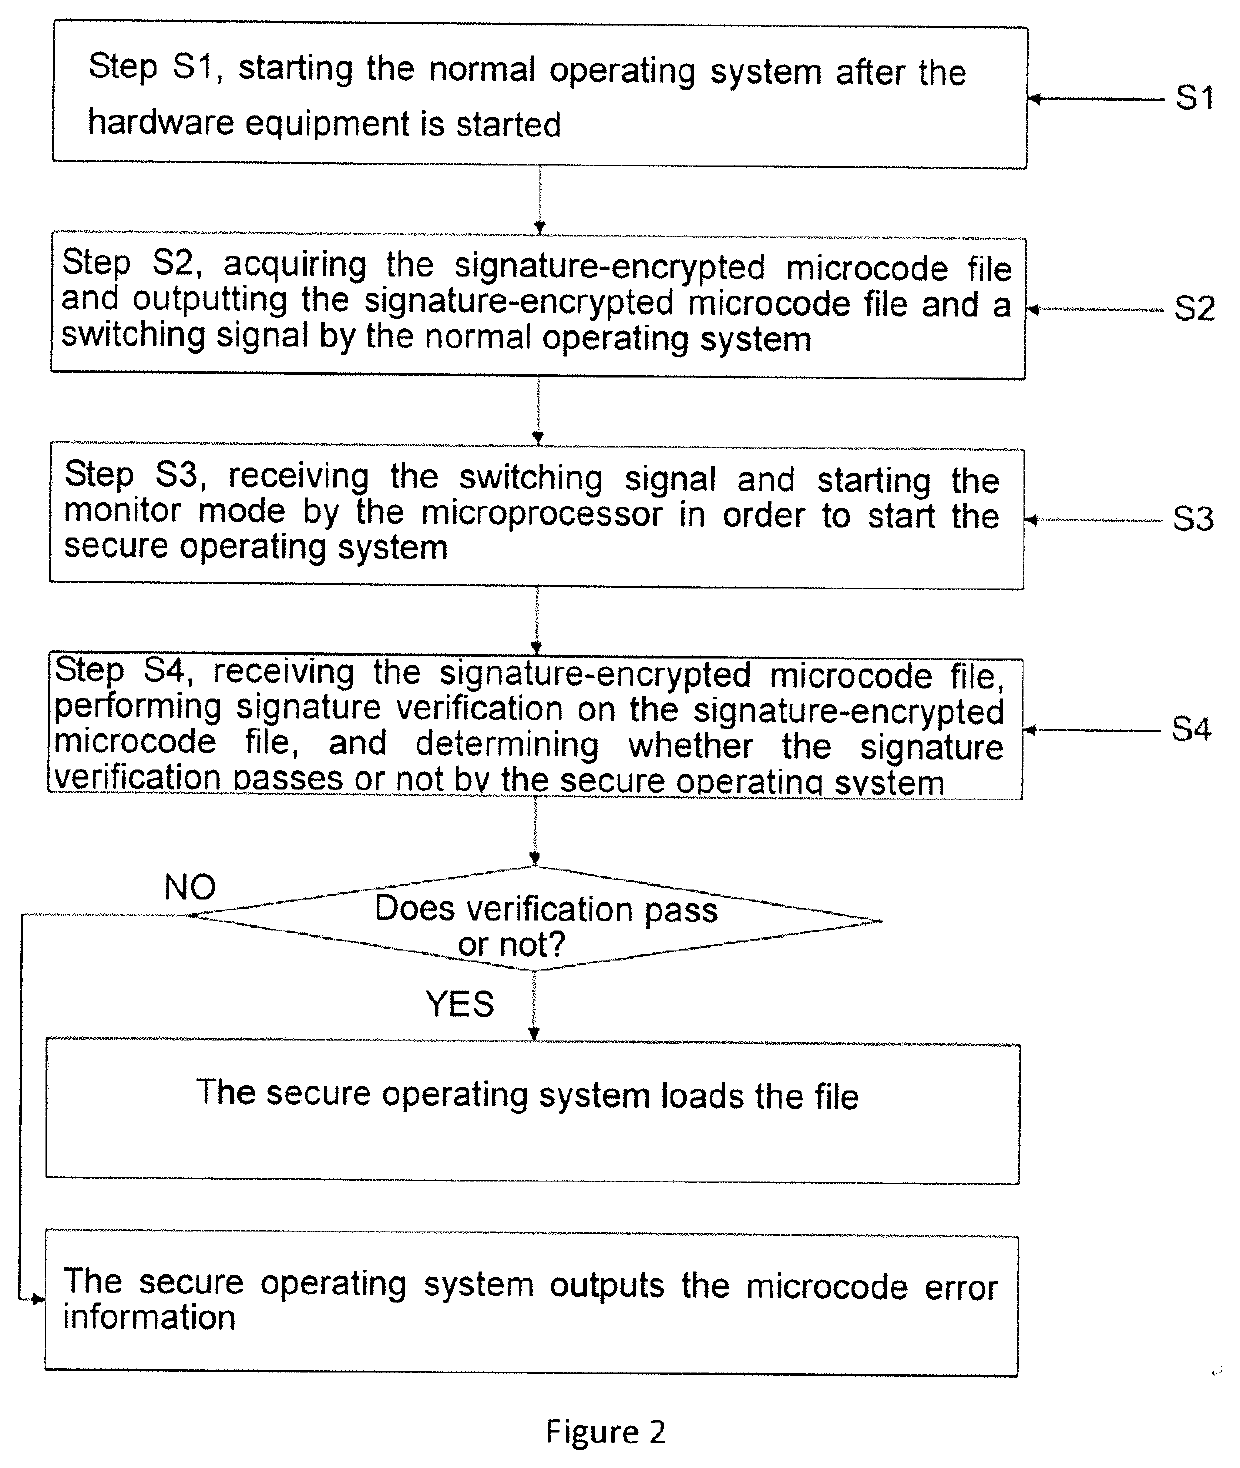 Microcode signature security management system based on trustzone technology and method